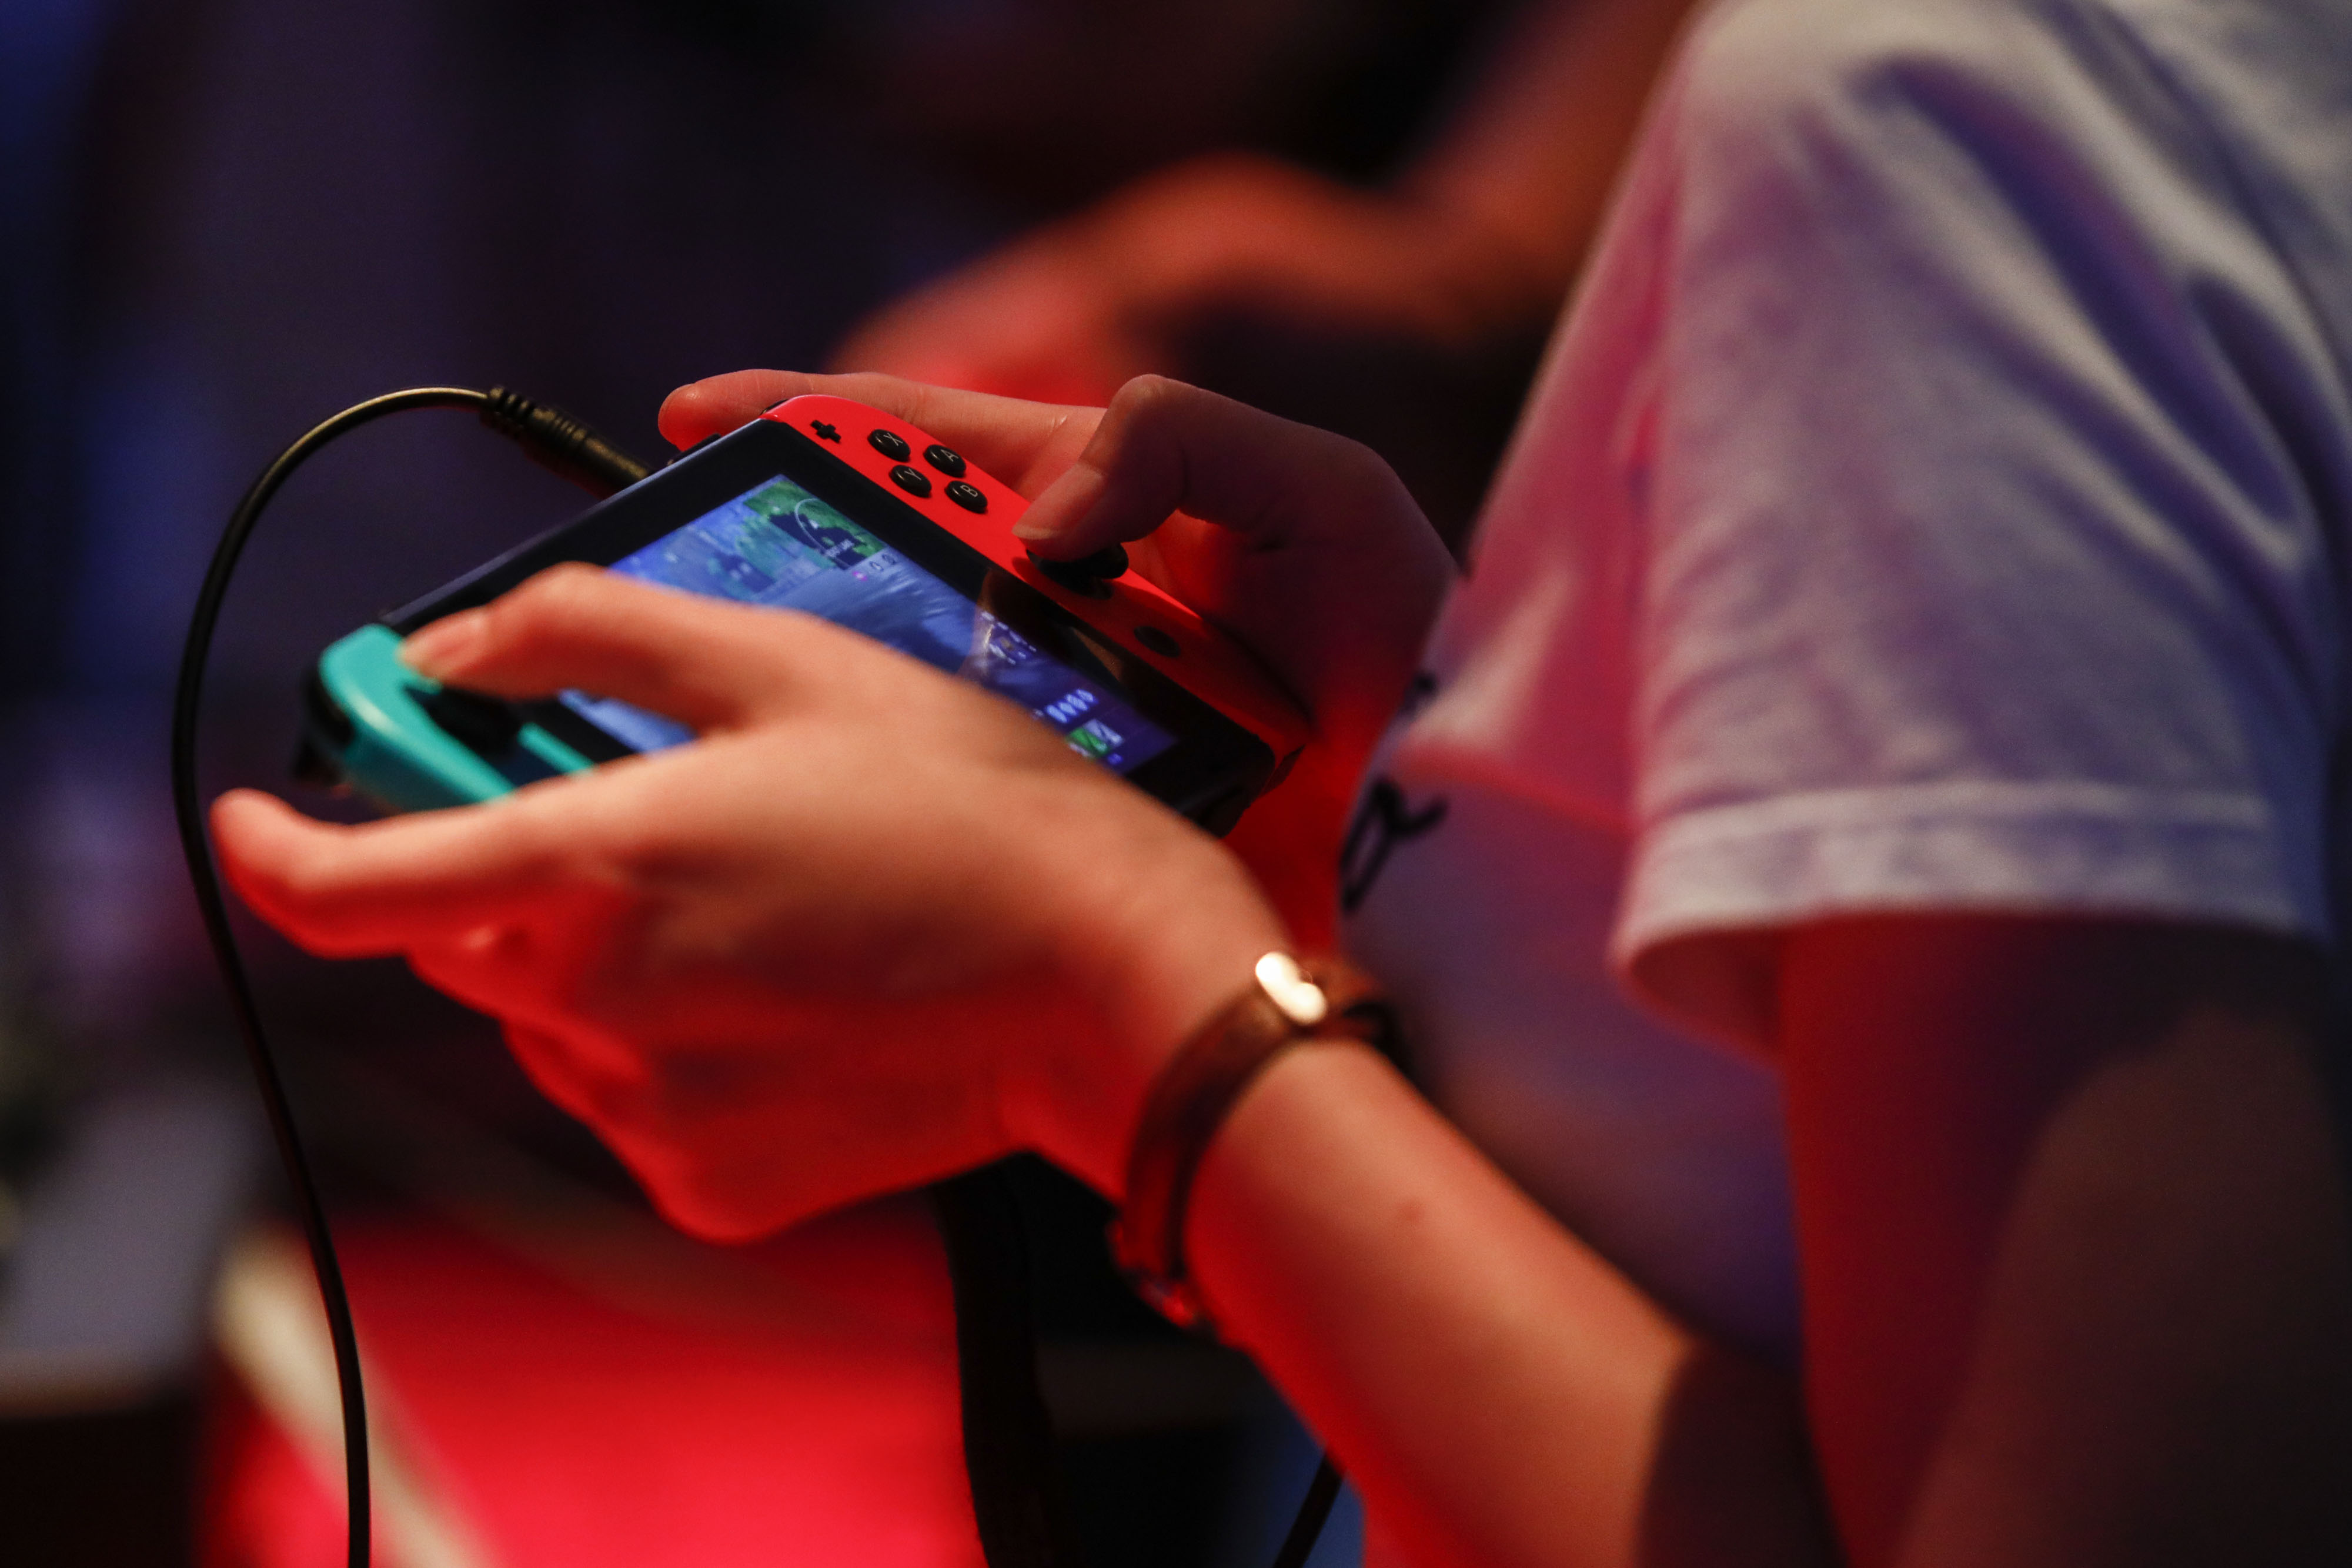 An attendee plays a video game on a Nintendo Switch console.